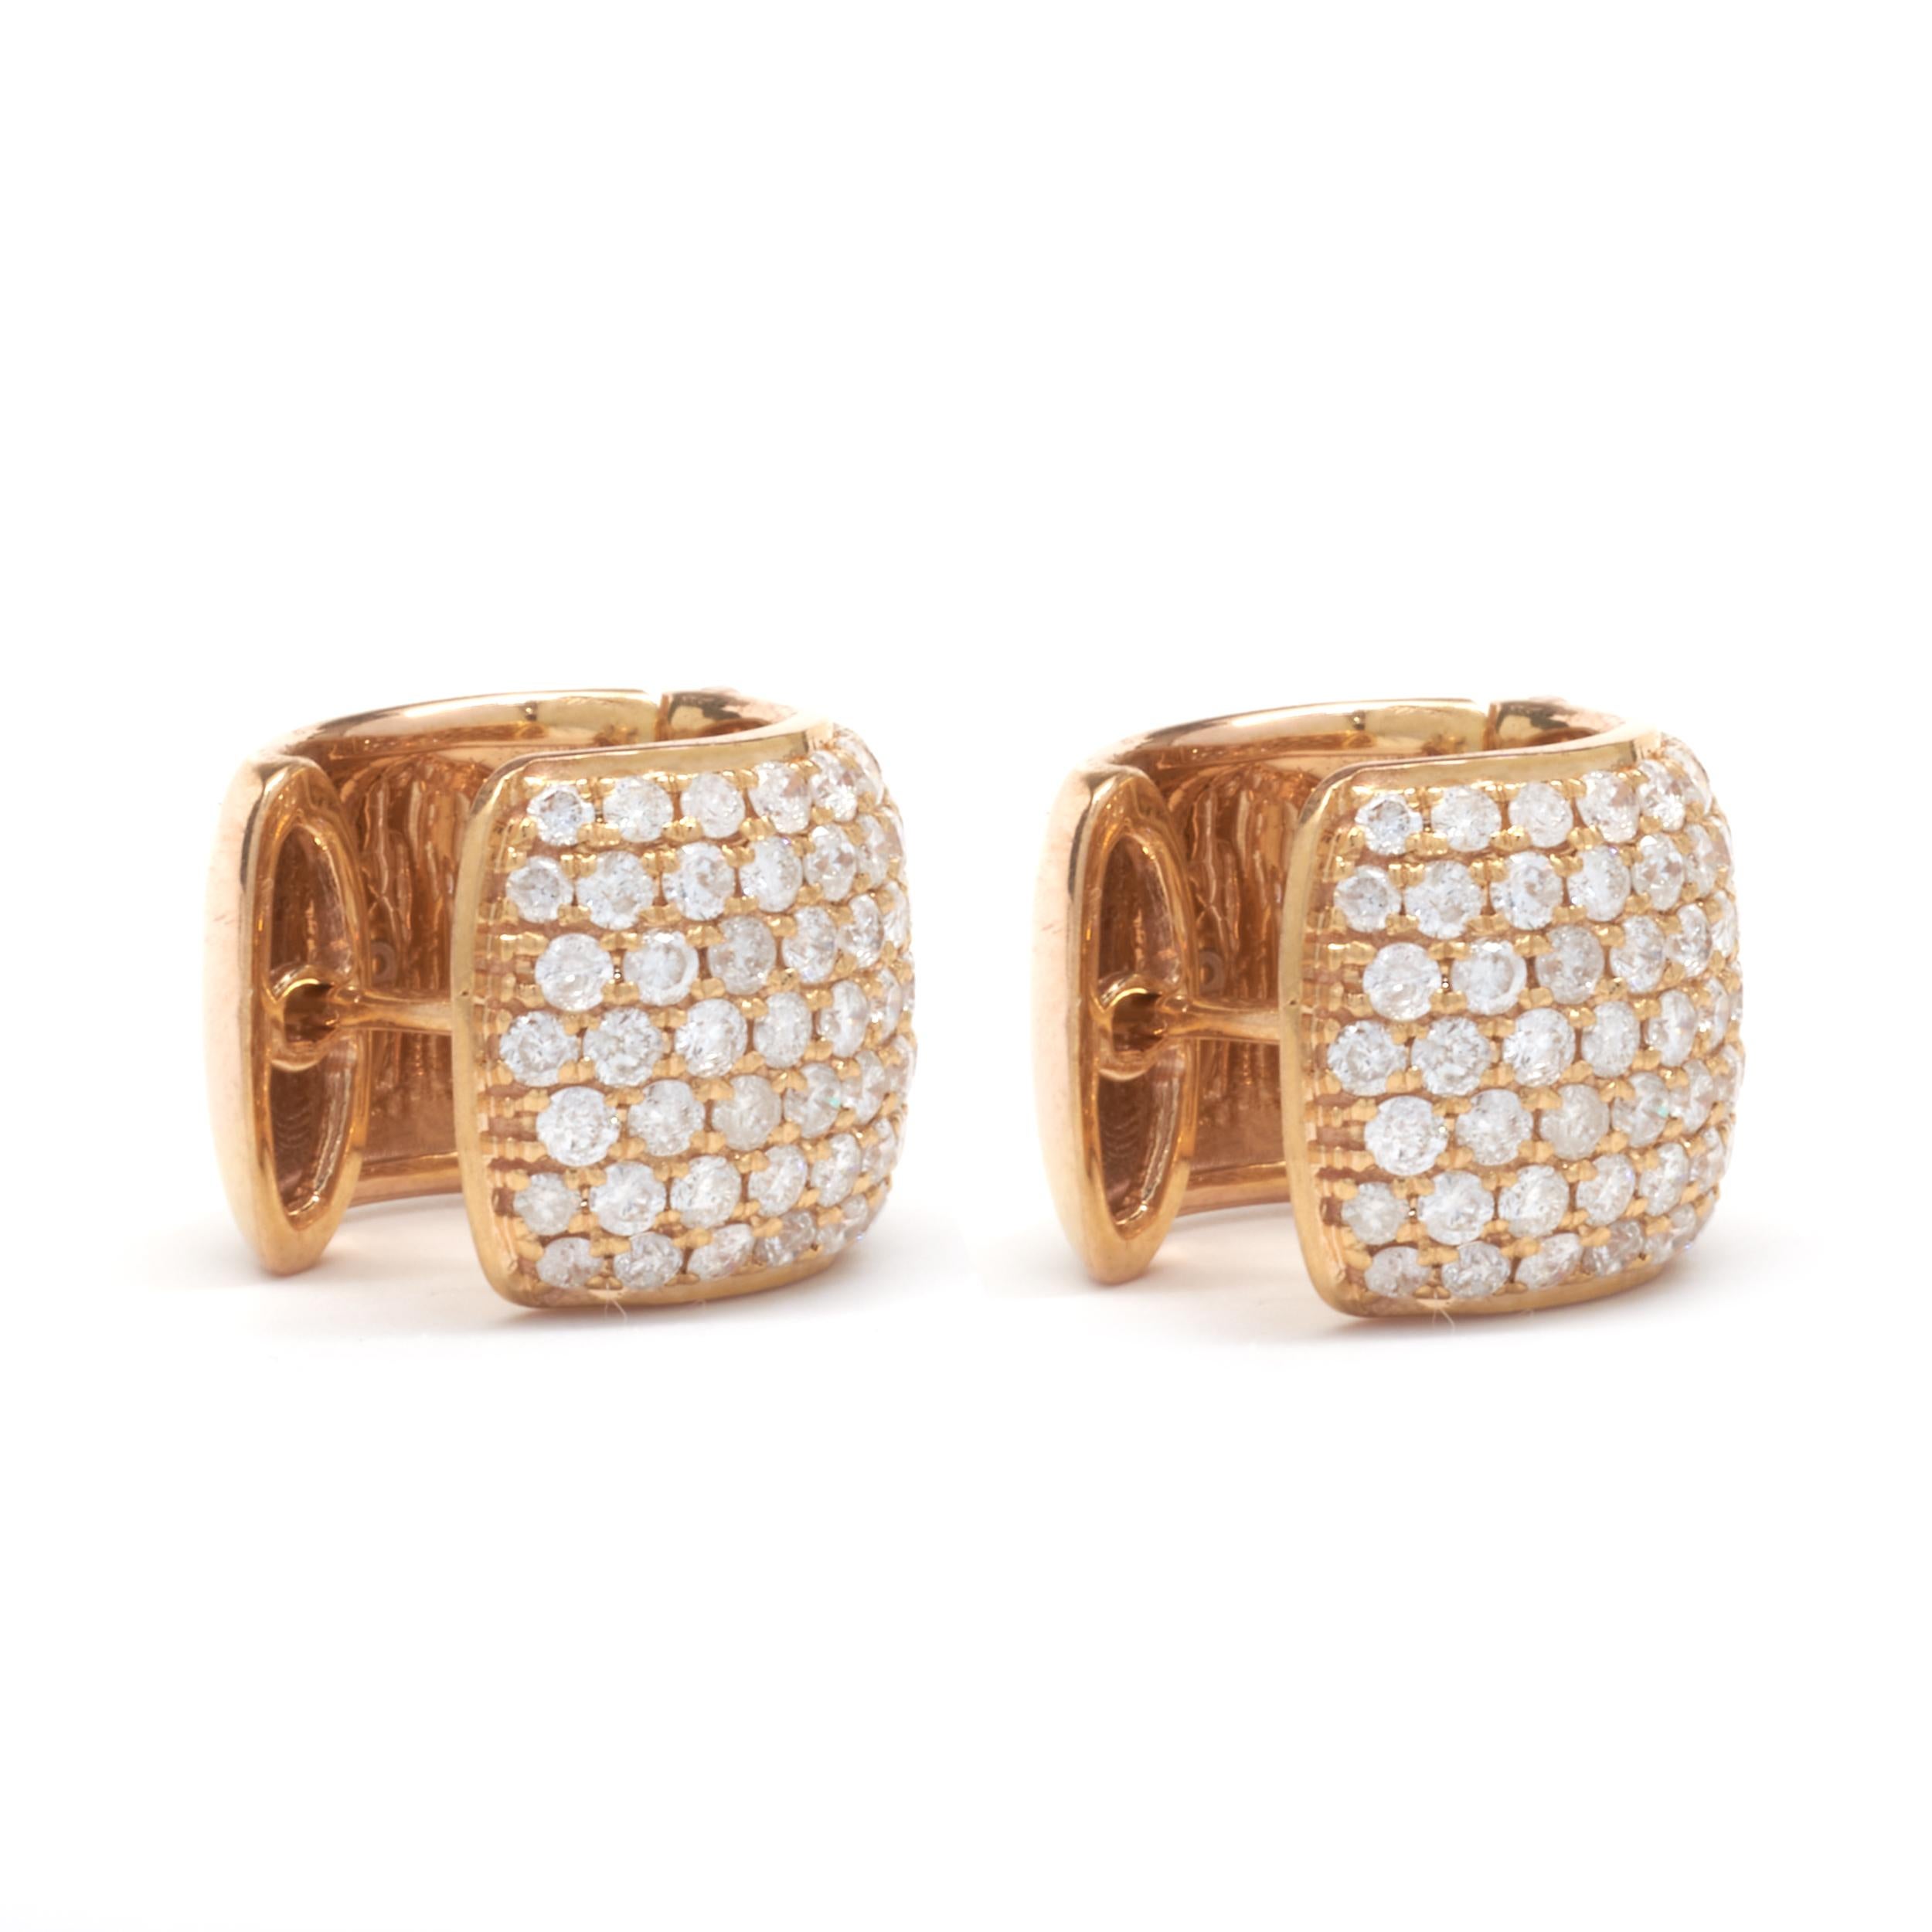 Material: 18k rose gold
Diamond: 132 round brilliant cut = 0.88cttw
Color: G
Clarity: VS1-2
Dimensions: earrings measure approximately 14 X 11mm
Fastenings: snap backs
Weight: 8.05 grams
